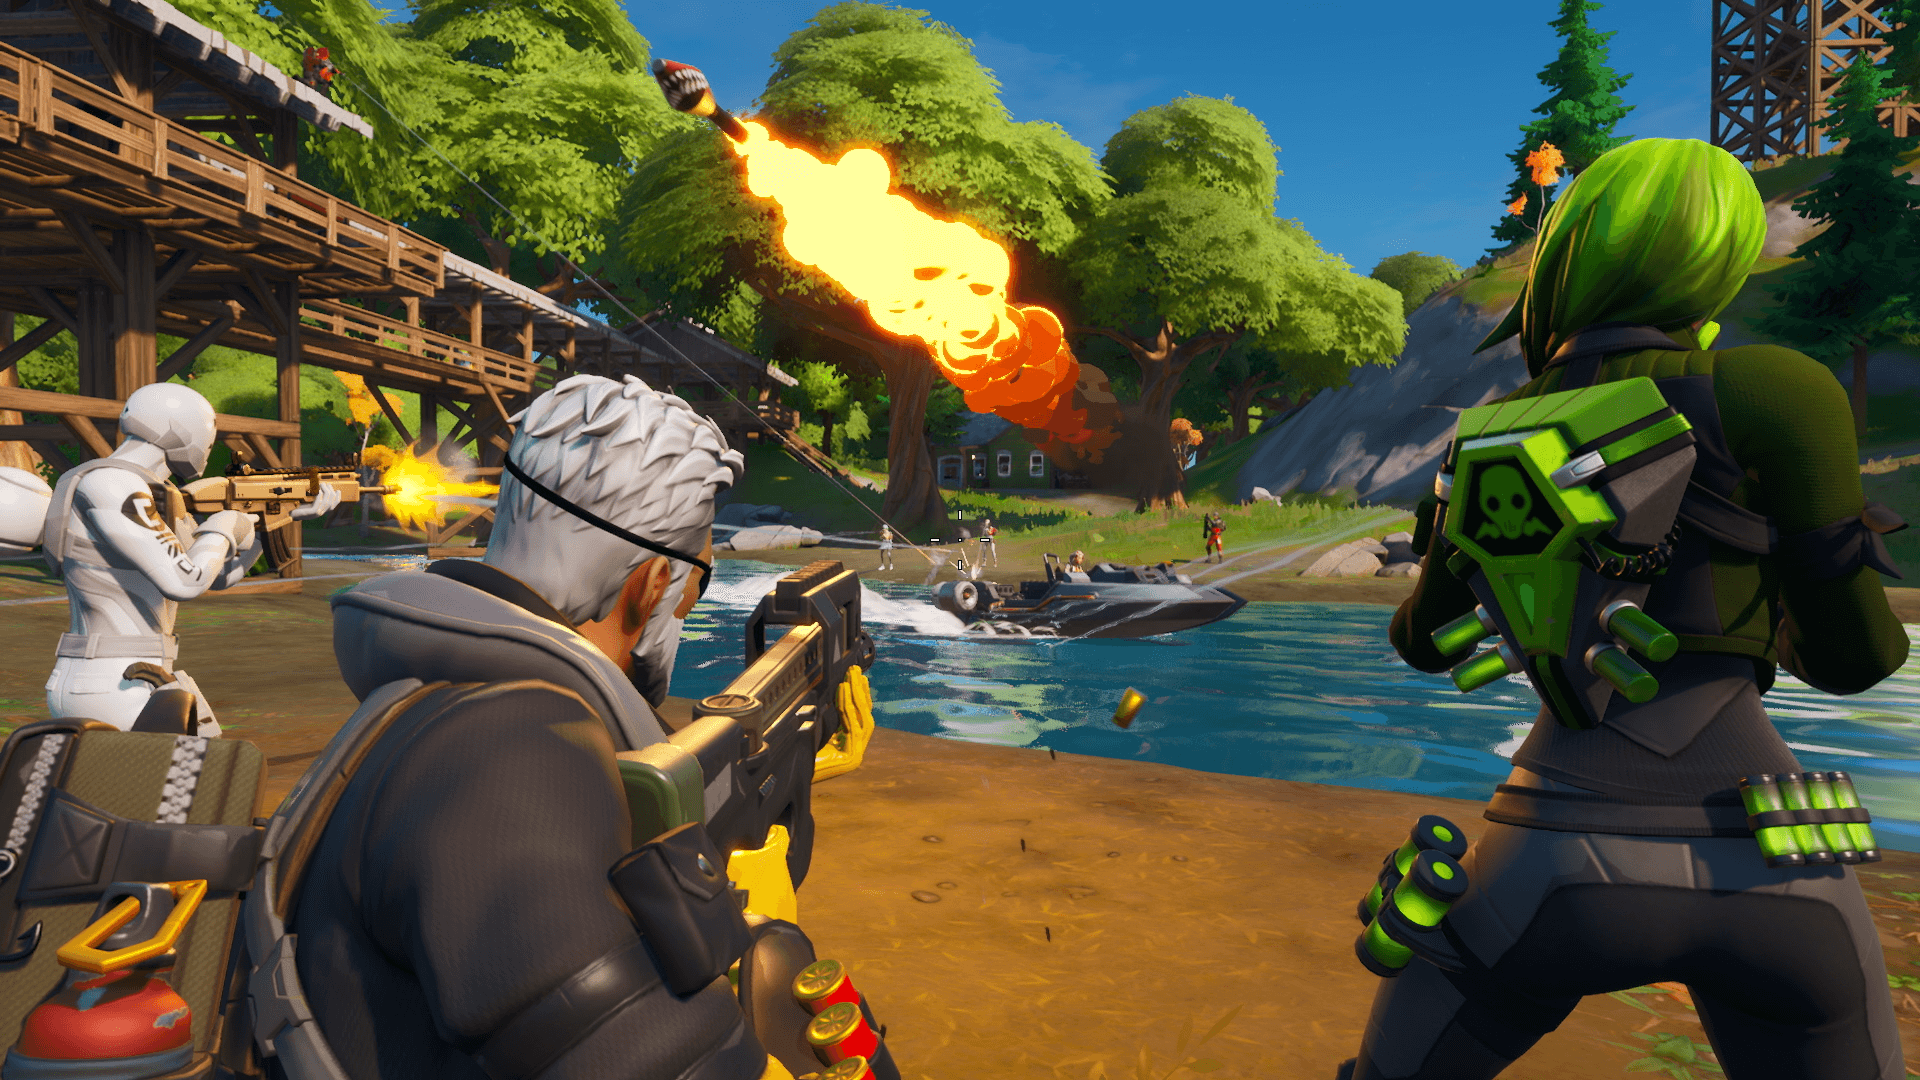 Fortnite' Chapter 2: Game Emerges From Black Hole With All New